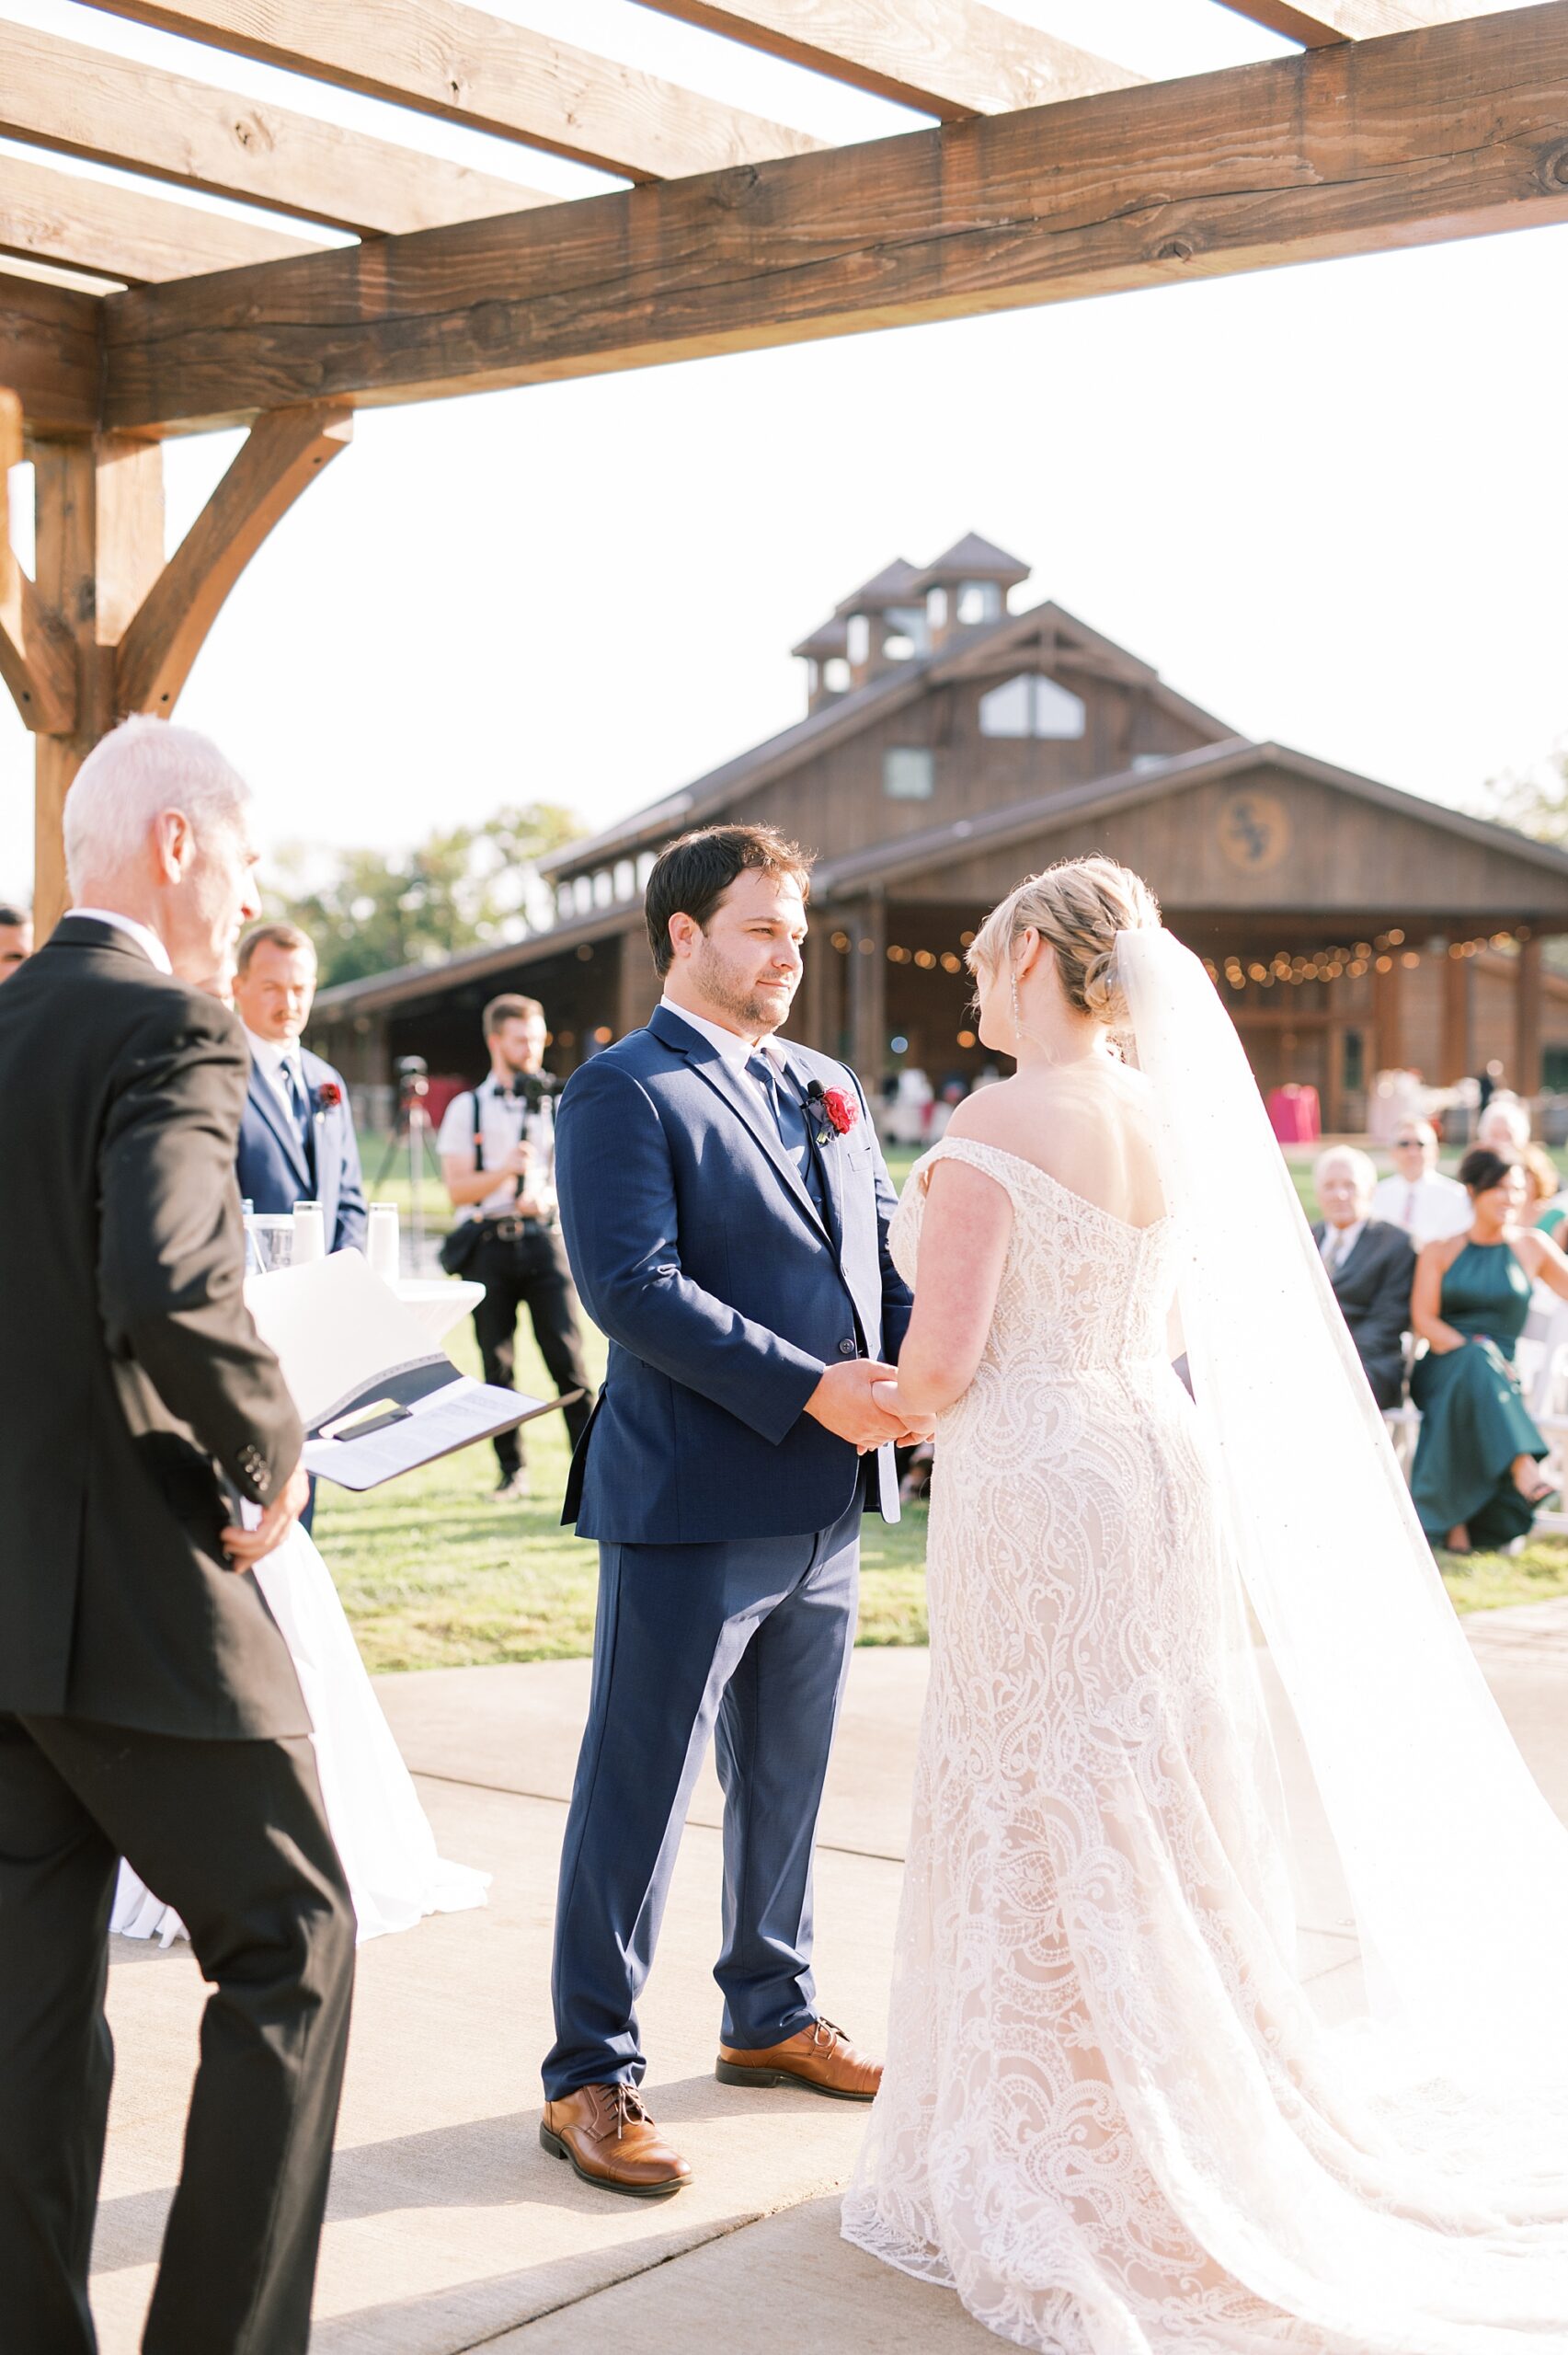 outdoor wedding ceremony at The Barn at Sycamore Farms